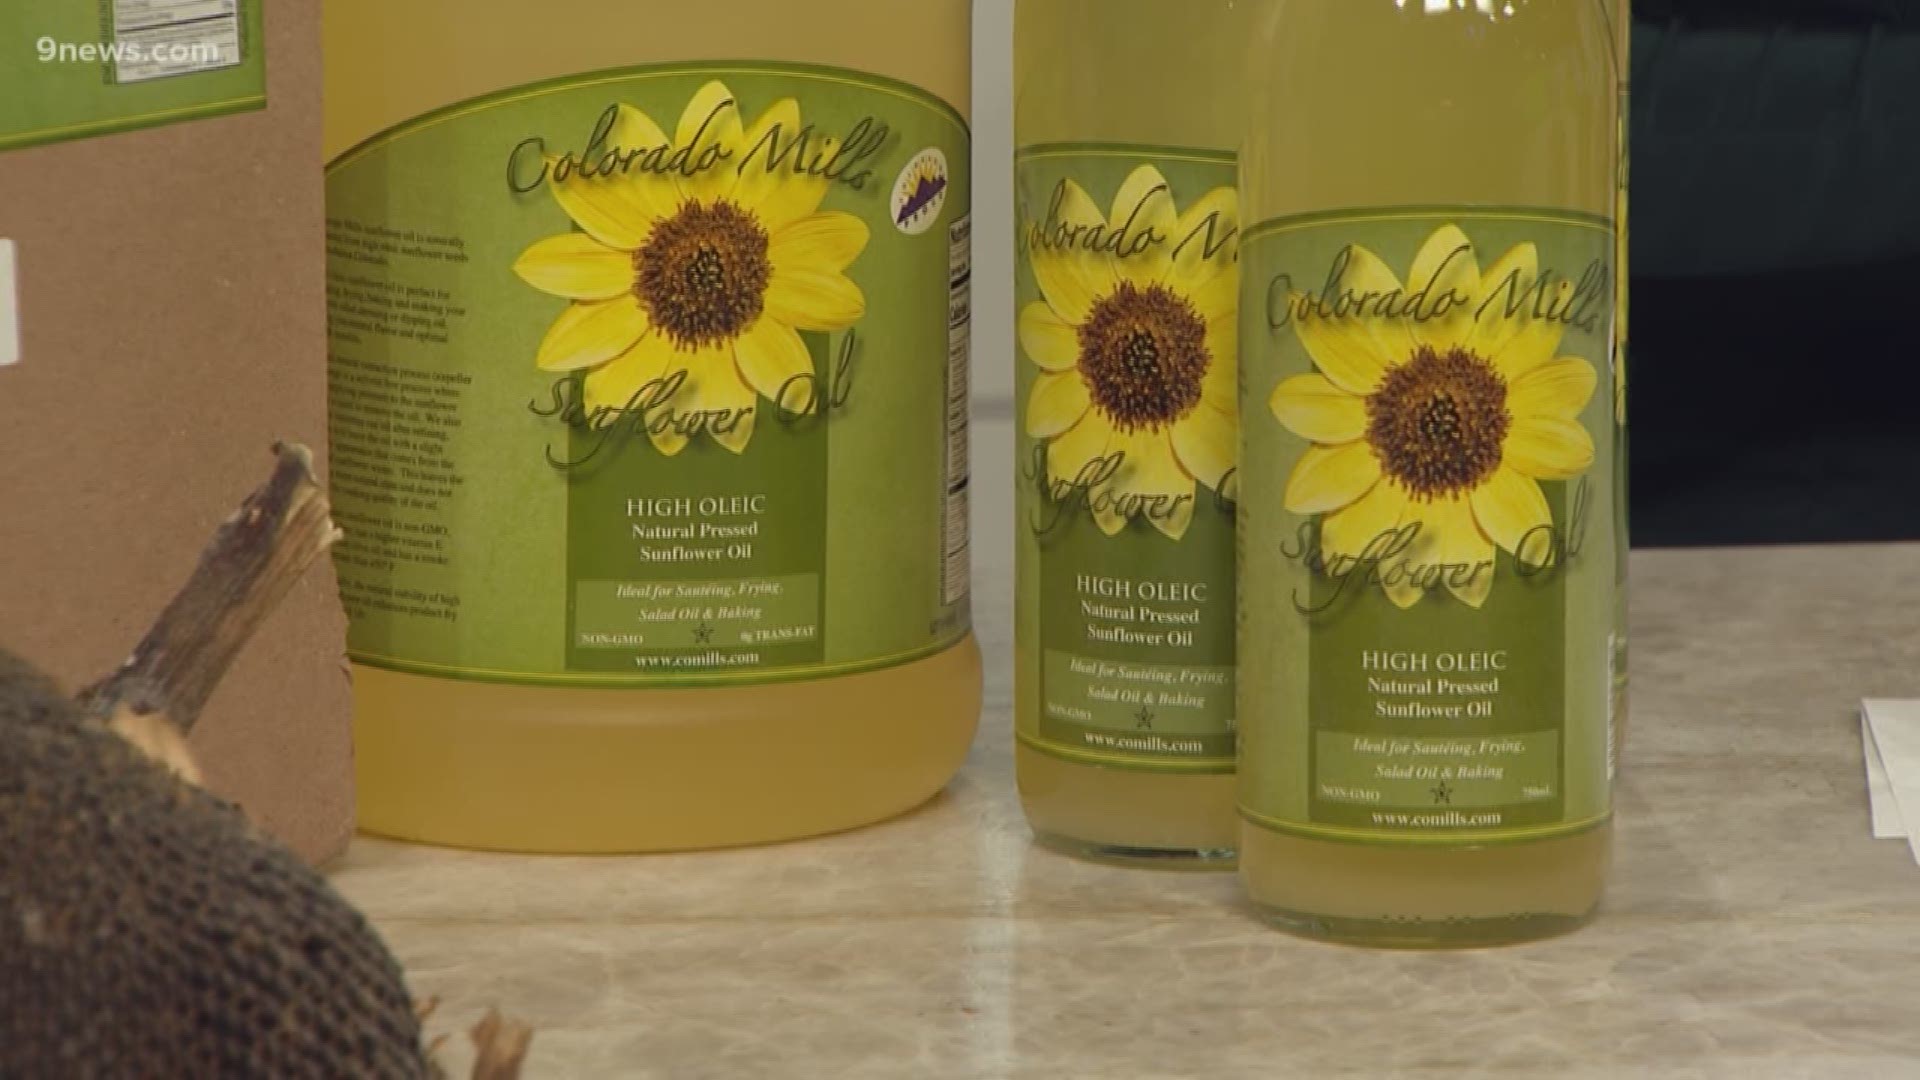 Colorado Mills in Lamar goes beyond the beauty of the sunflower fields, pressing the seeds into organic sunflower oil and the byproducts into livestock feed.